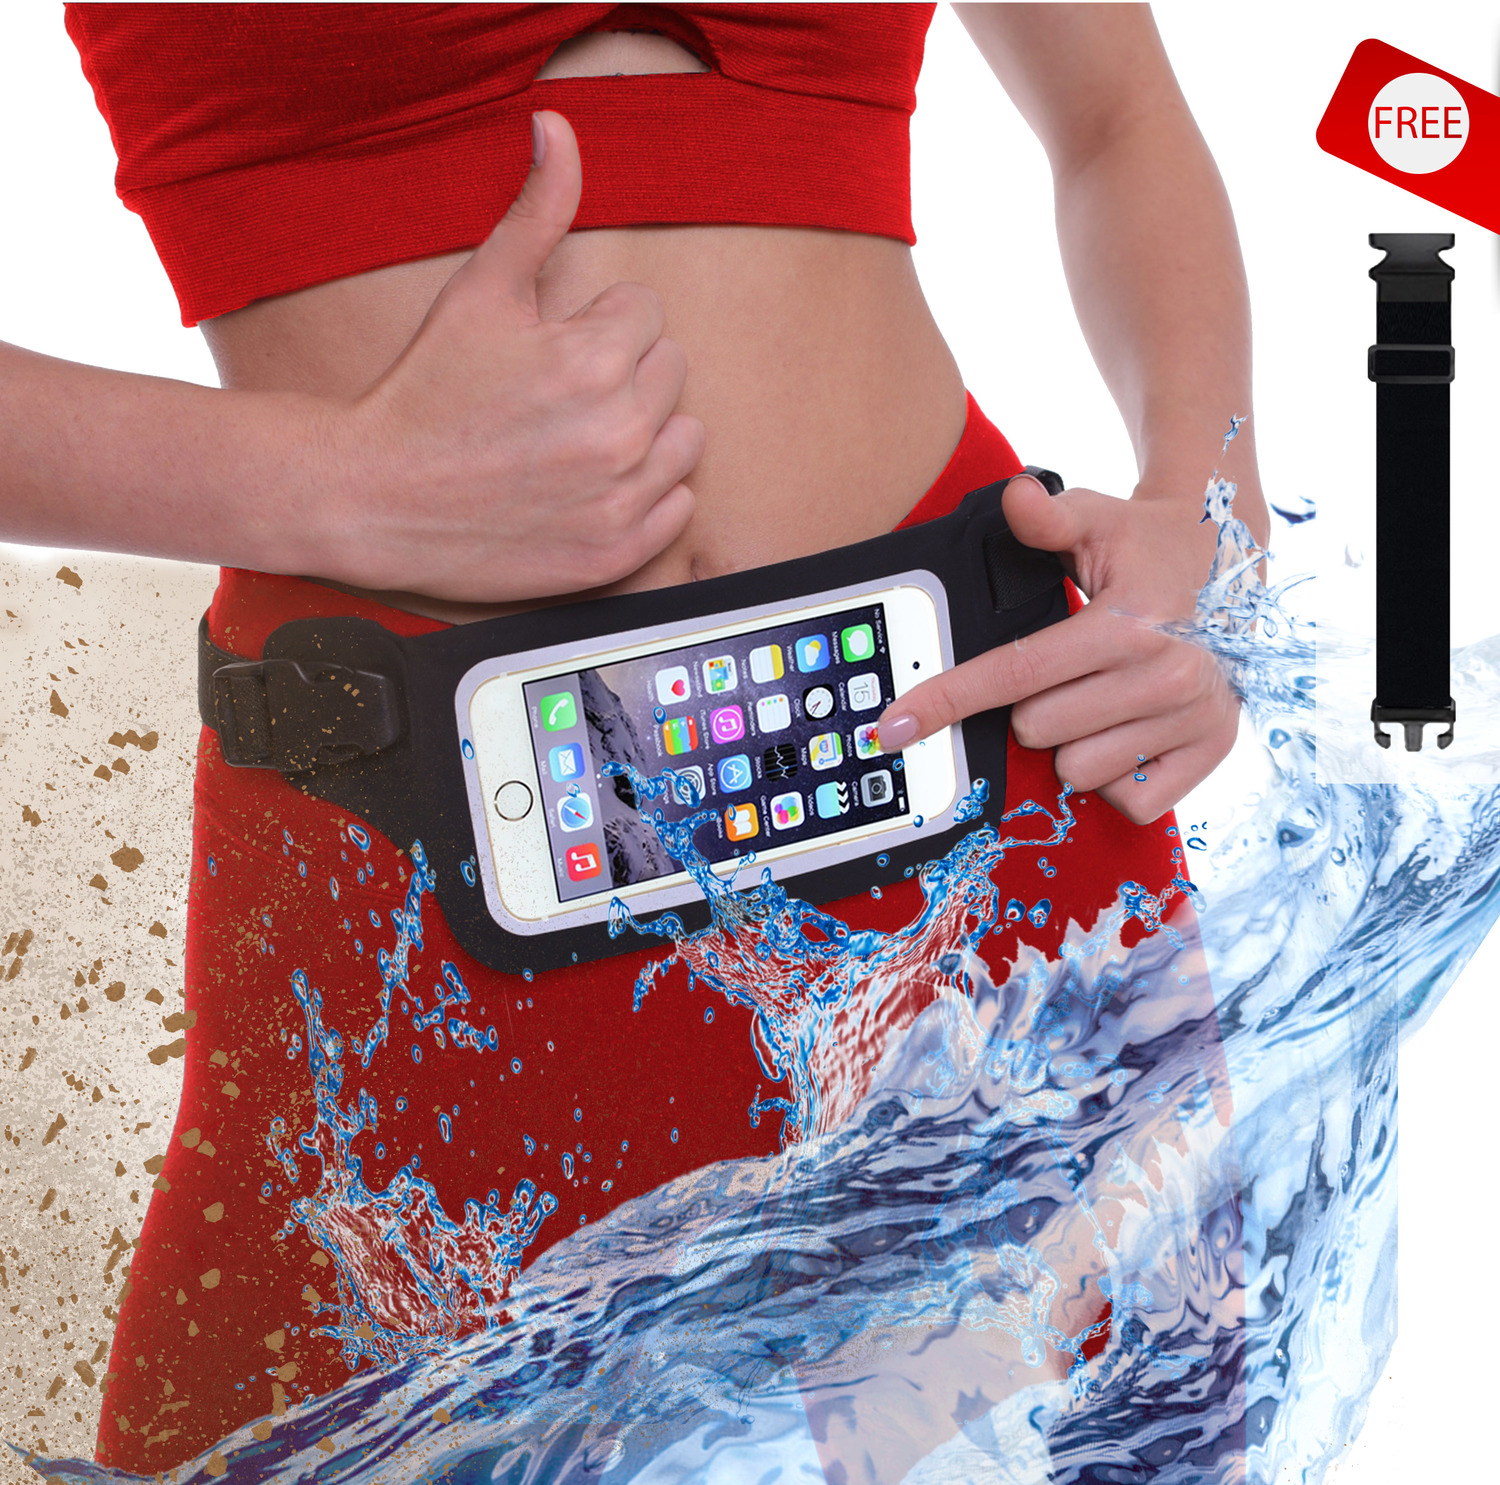 New Waterproof Running Belt Fanny Pack for iPhone 7, X, 8 and Samsung S7/8/9 (Slim Case) - W/Touchscreen Ready Window - IPX8 Rated Submersible Waist Bag for Fitness, Travel, Beach, Kayaking, Swimming and more!